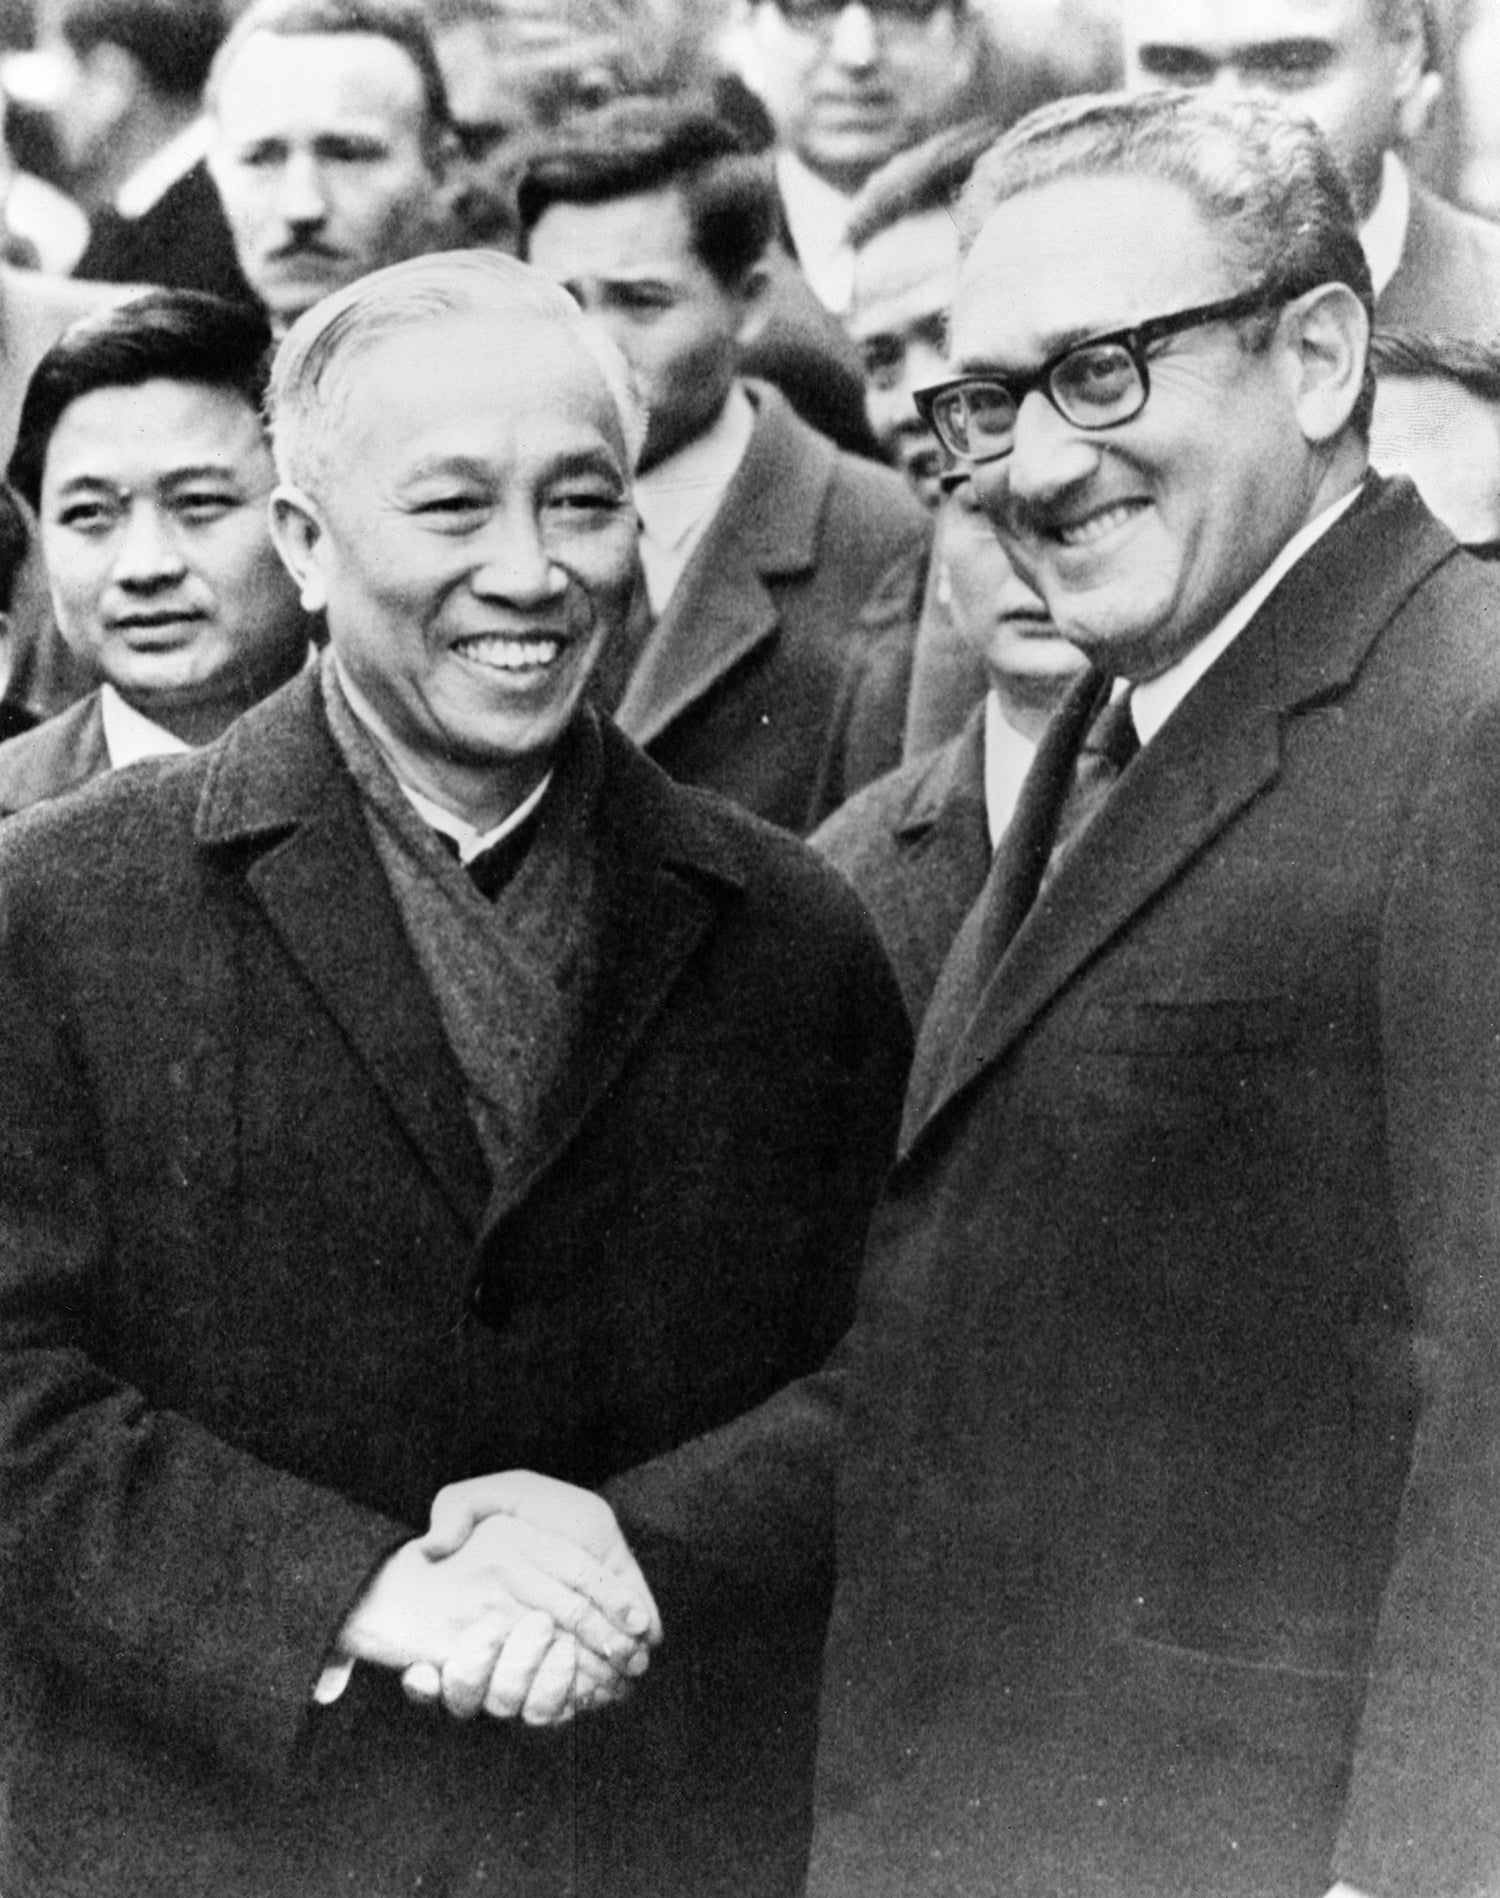 North Vietnamese politburo member Le Duc Tho with Kissinger during peace talks on the Vietnam War in Paris, France on 24 January 1973